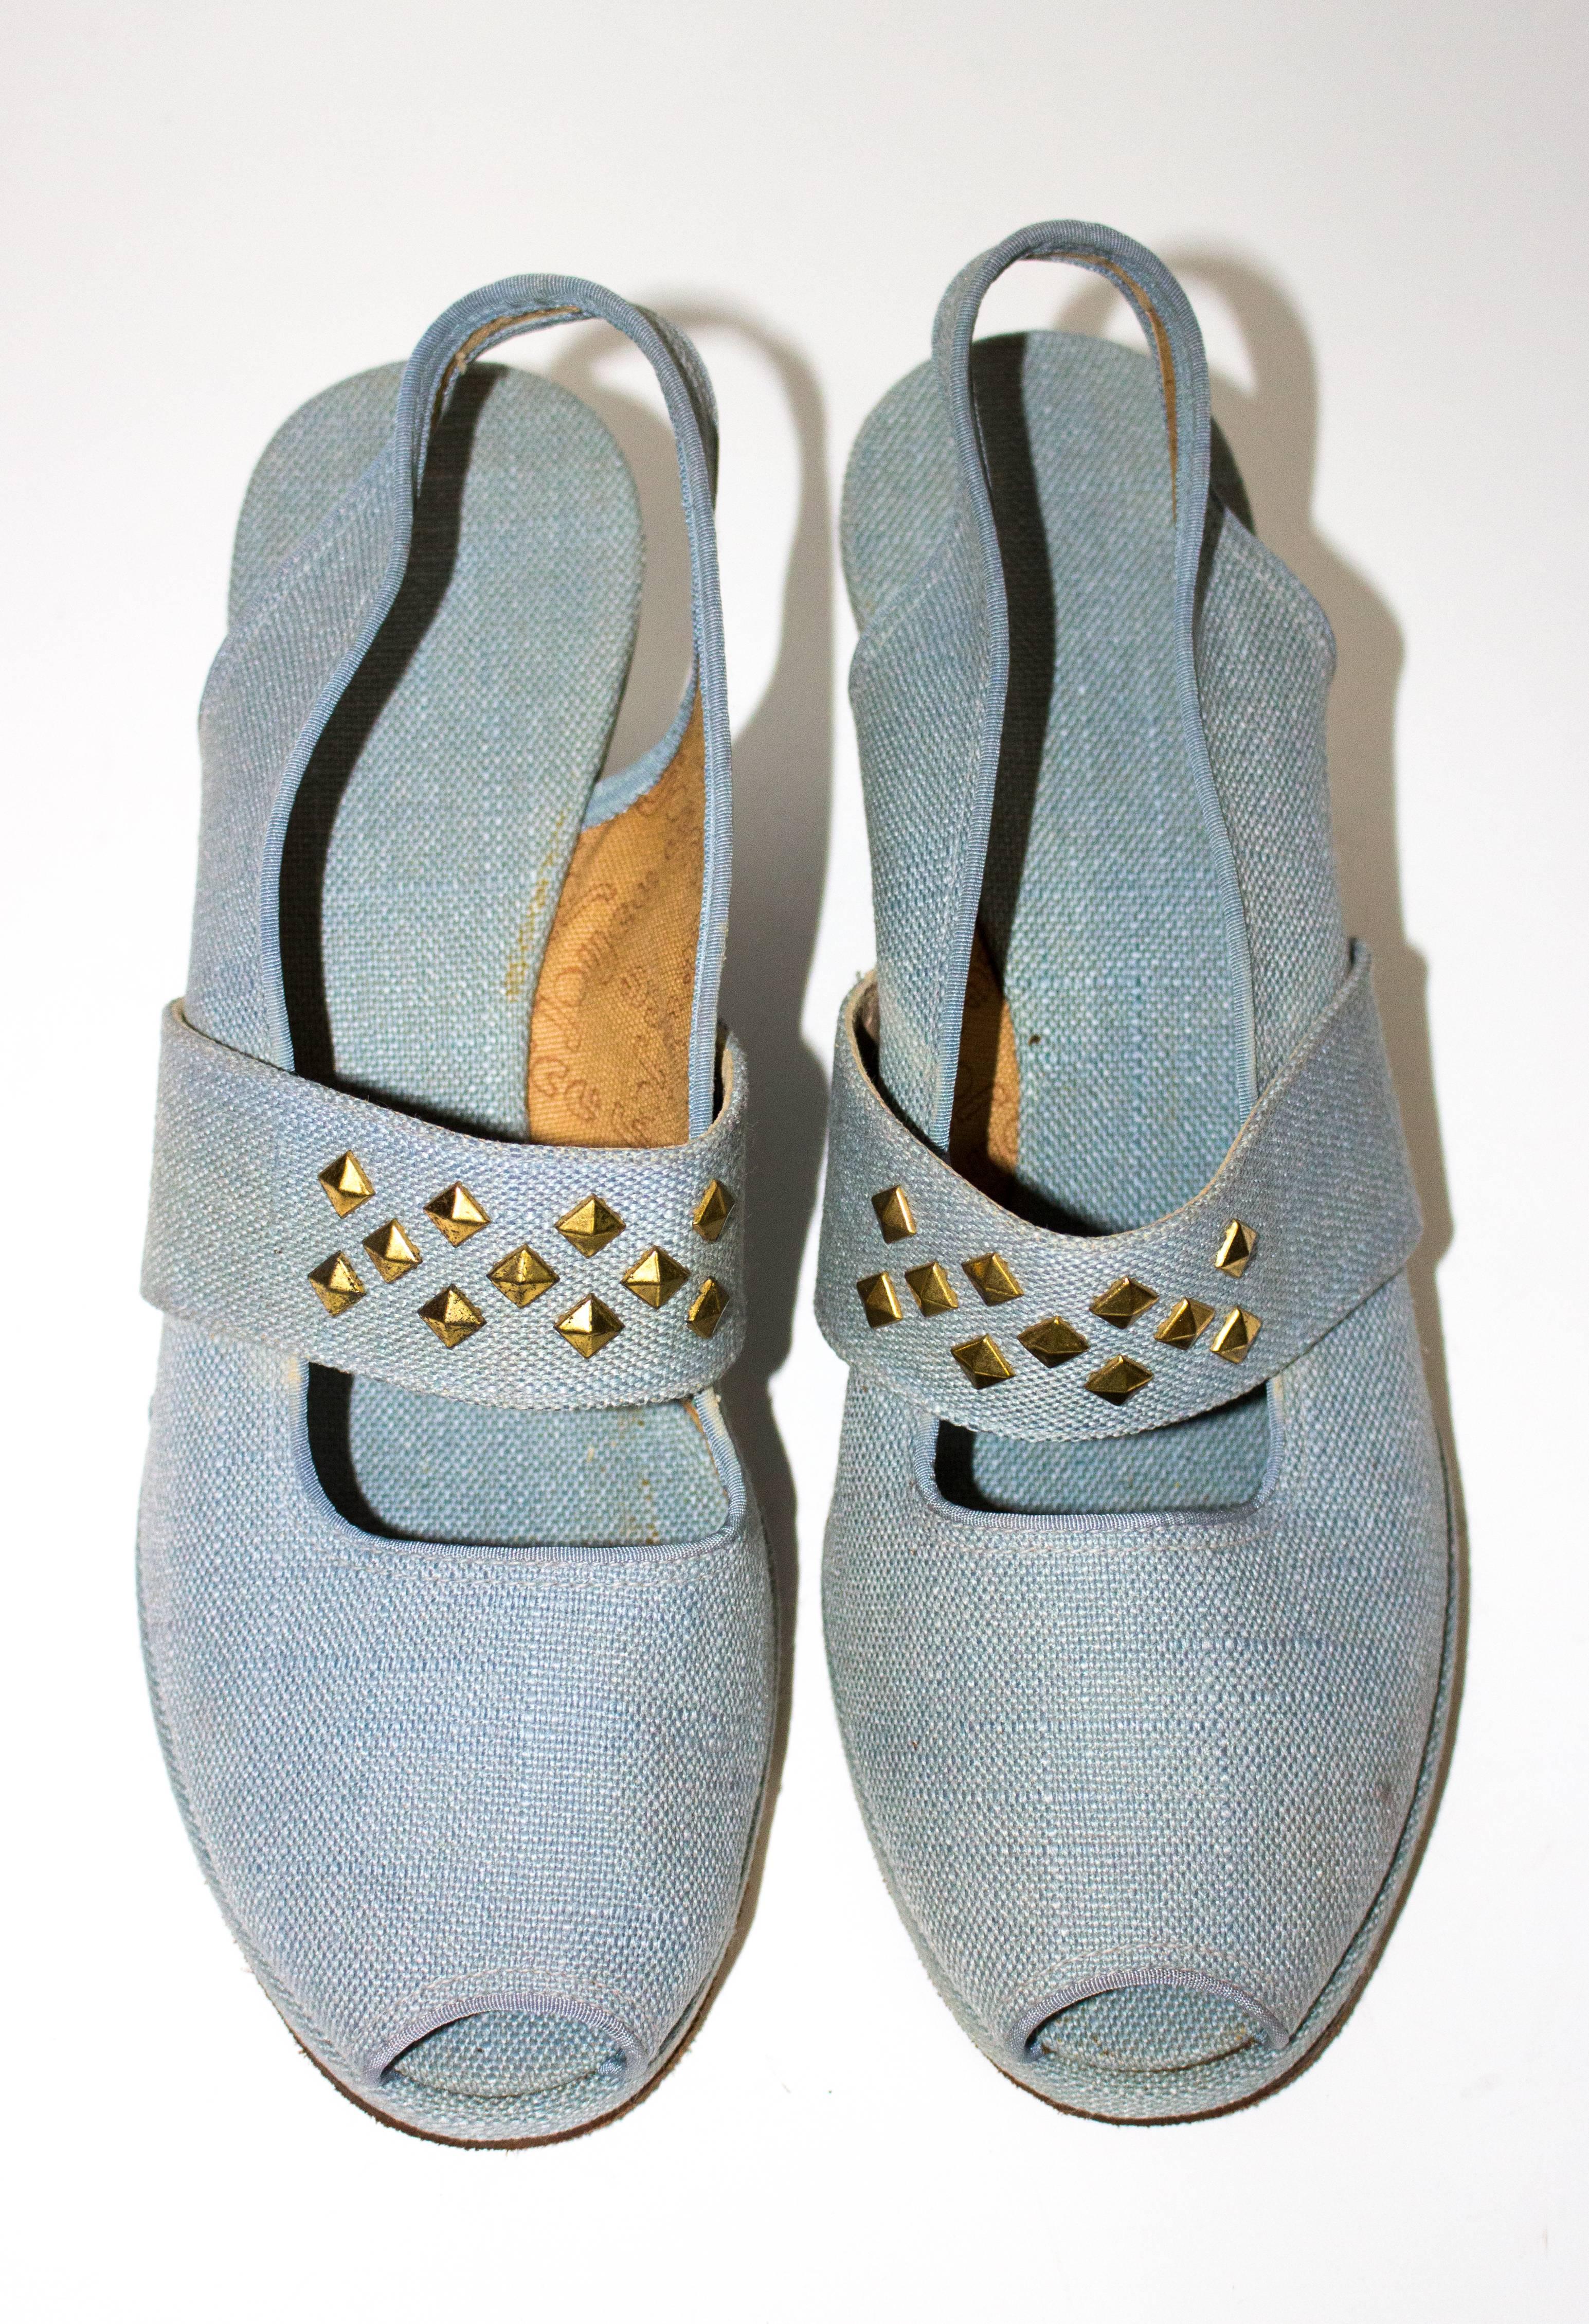 1940s wedges in a light denim-tone wash. Peeptoe slingbacks. Elasticated front strap embellished with gold tone studs. Canvas insole. Suede leather sole. Comes with original advertisement. Never worn!

Insole: 9 3/4"
Palm of foot: 3